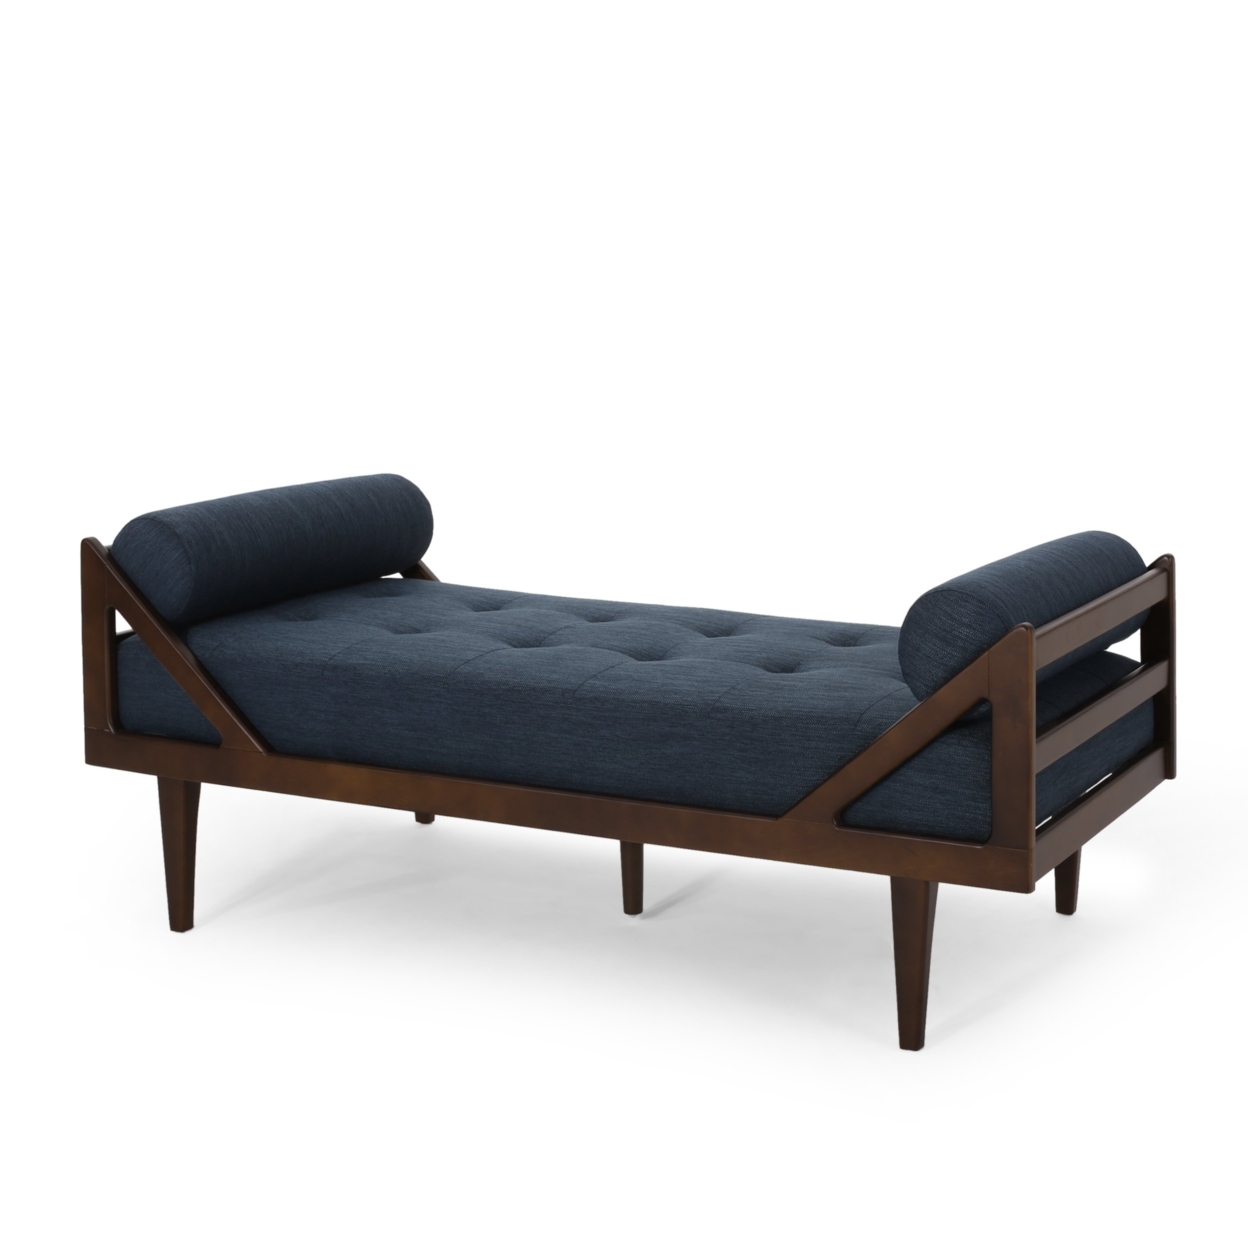 Sumner Contemporary Tufted Chaise Lounge With Rolled Accent Pillows - Dark Brown/navy Blue